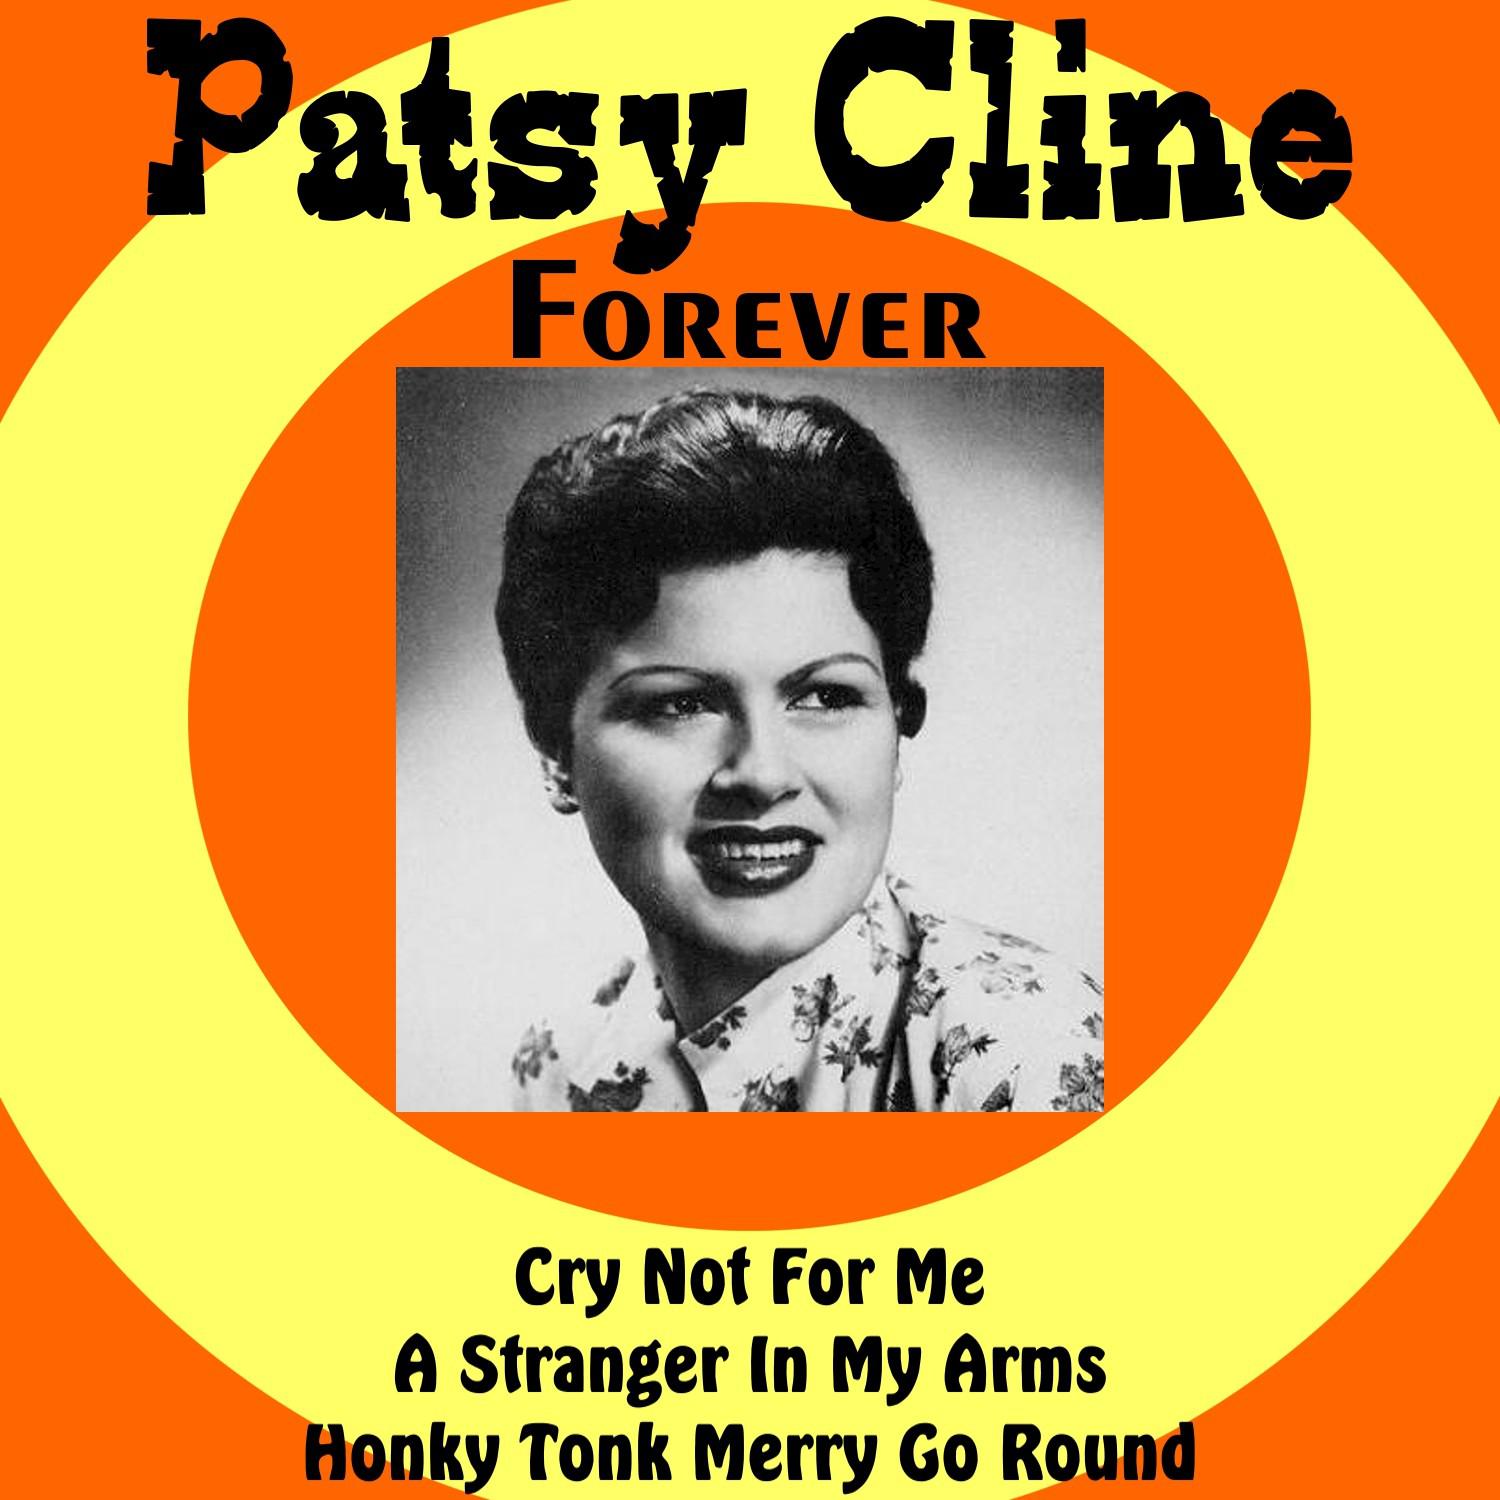 Patsy Cline Forever